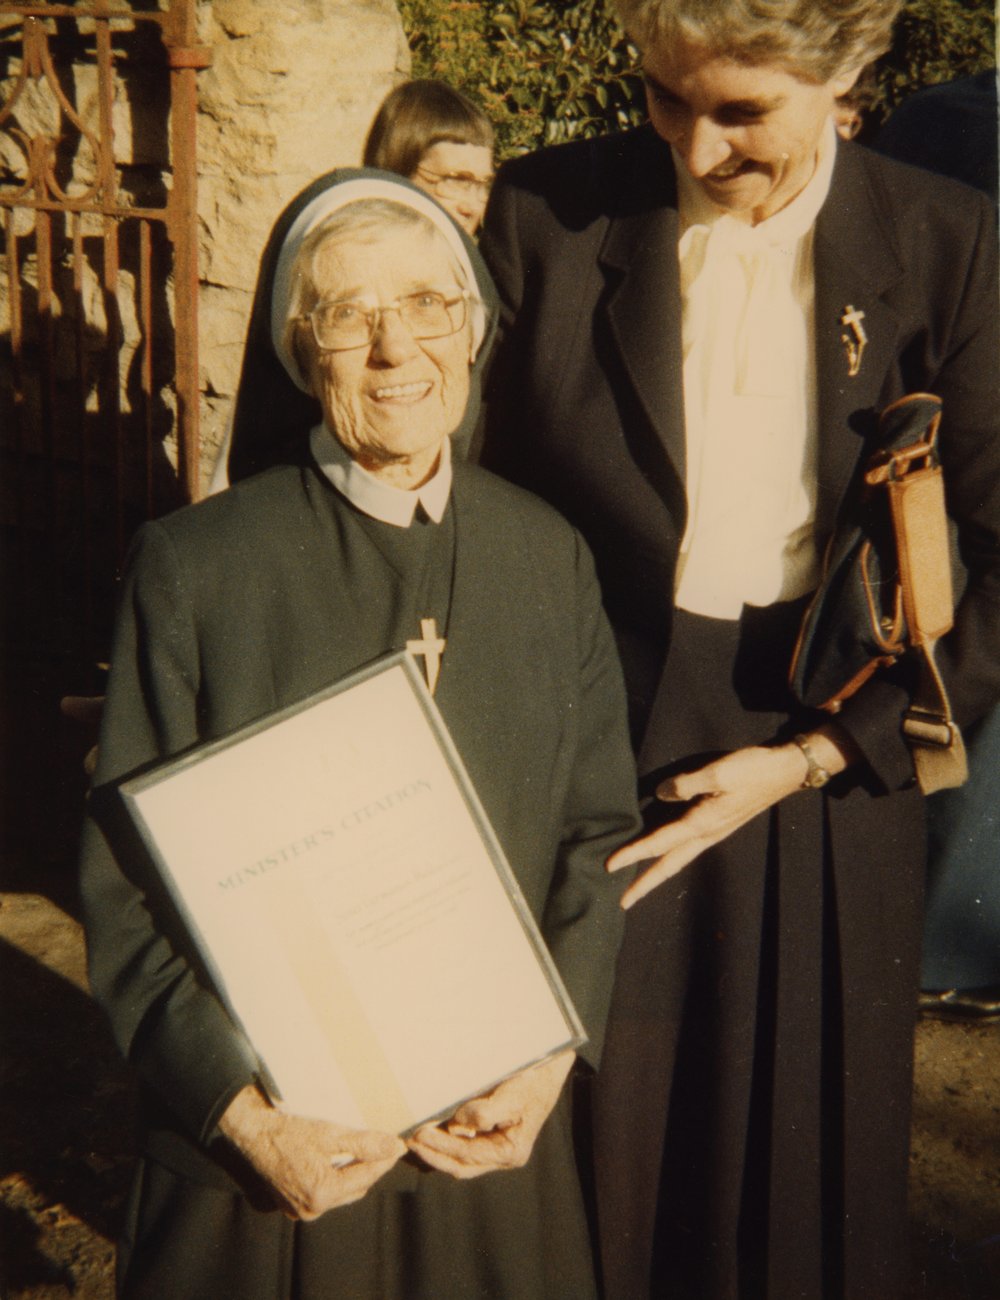  Sr Germanus McQuillan (left) with Sr Mary Maguire at The Norma Parker Centre, Parramatta on the occasion of Sr Germanus receiving a NSW Minister’s Citation for her dedicated service to prisoners, their families and prison staff, 1985.  